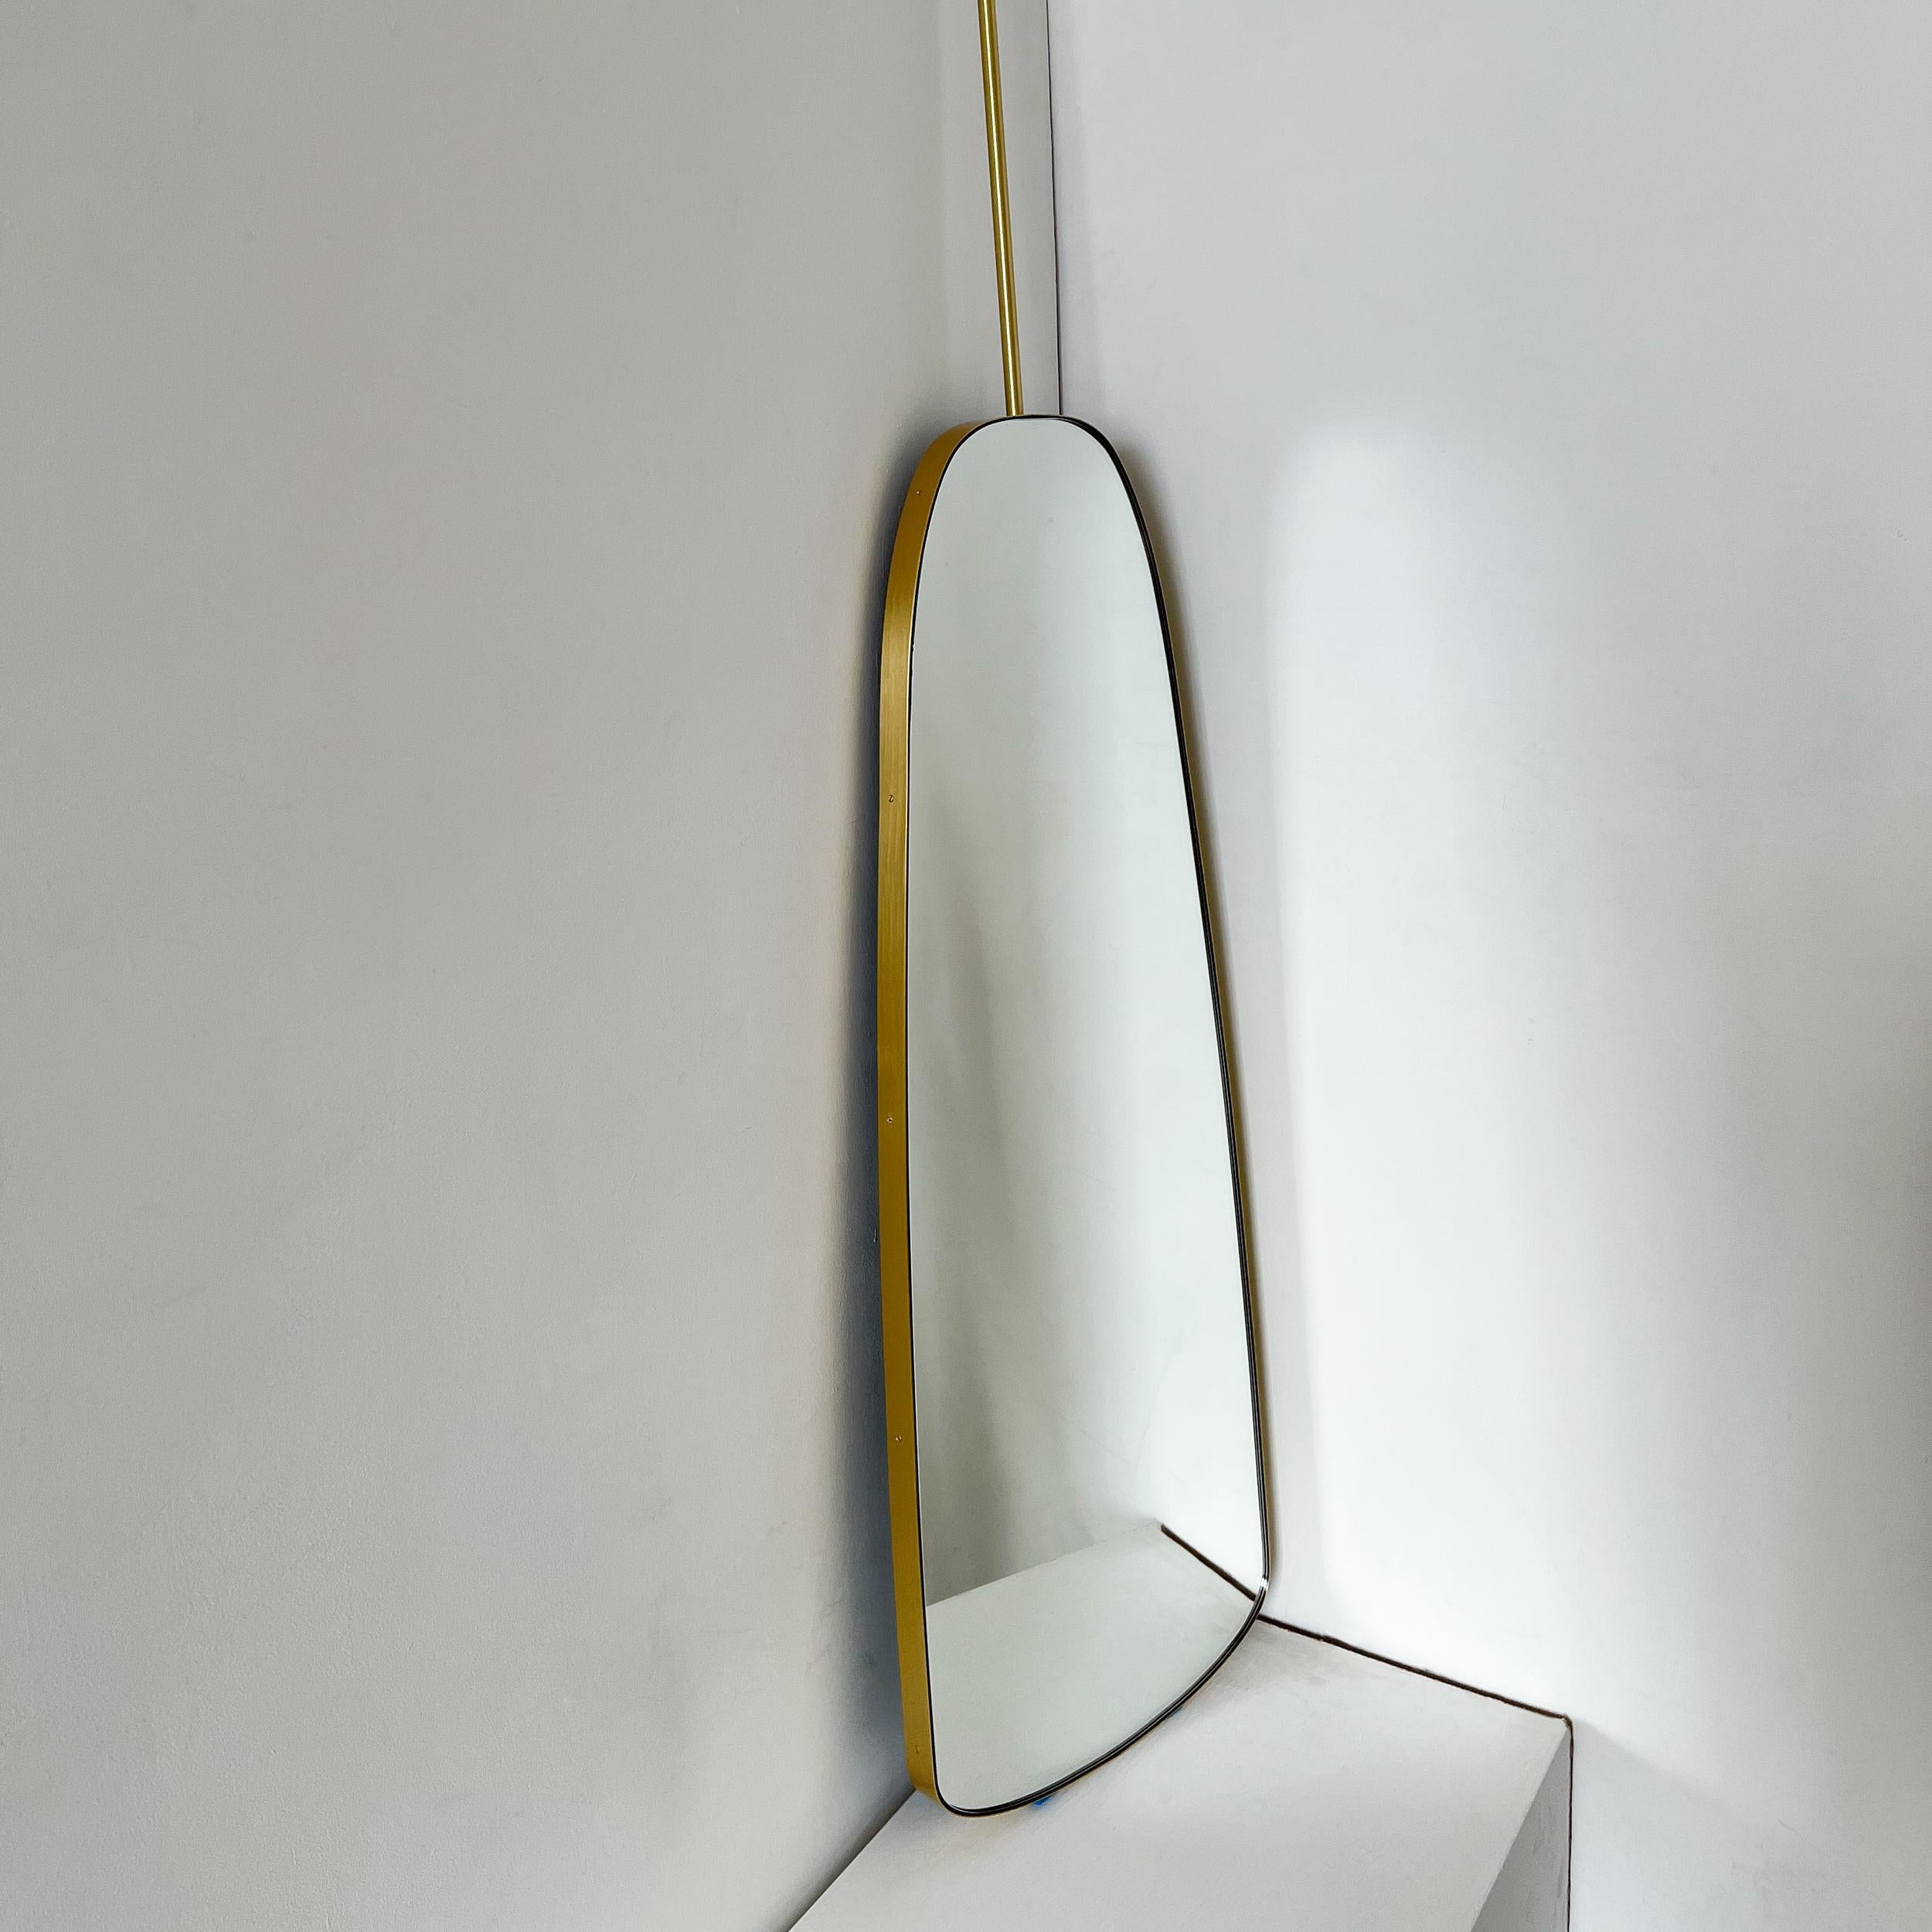 British Art Deco Ceiling Suspended Organic Shaped Mirror with Brass Frame For Sale